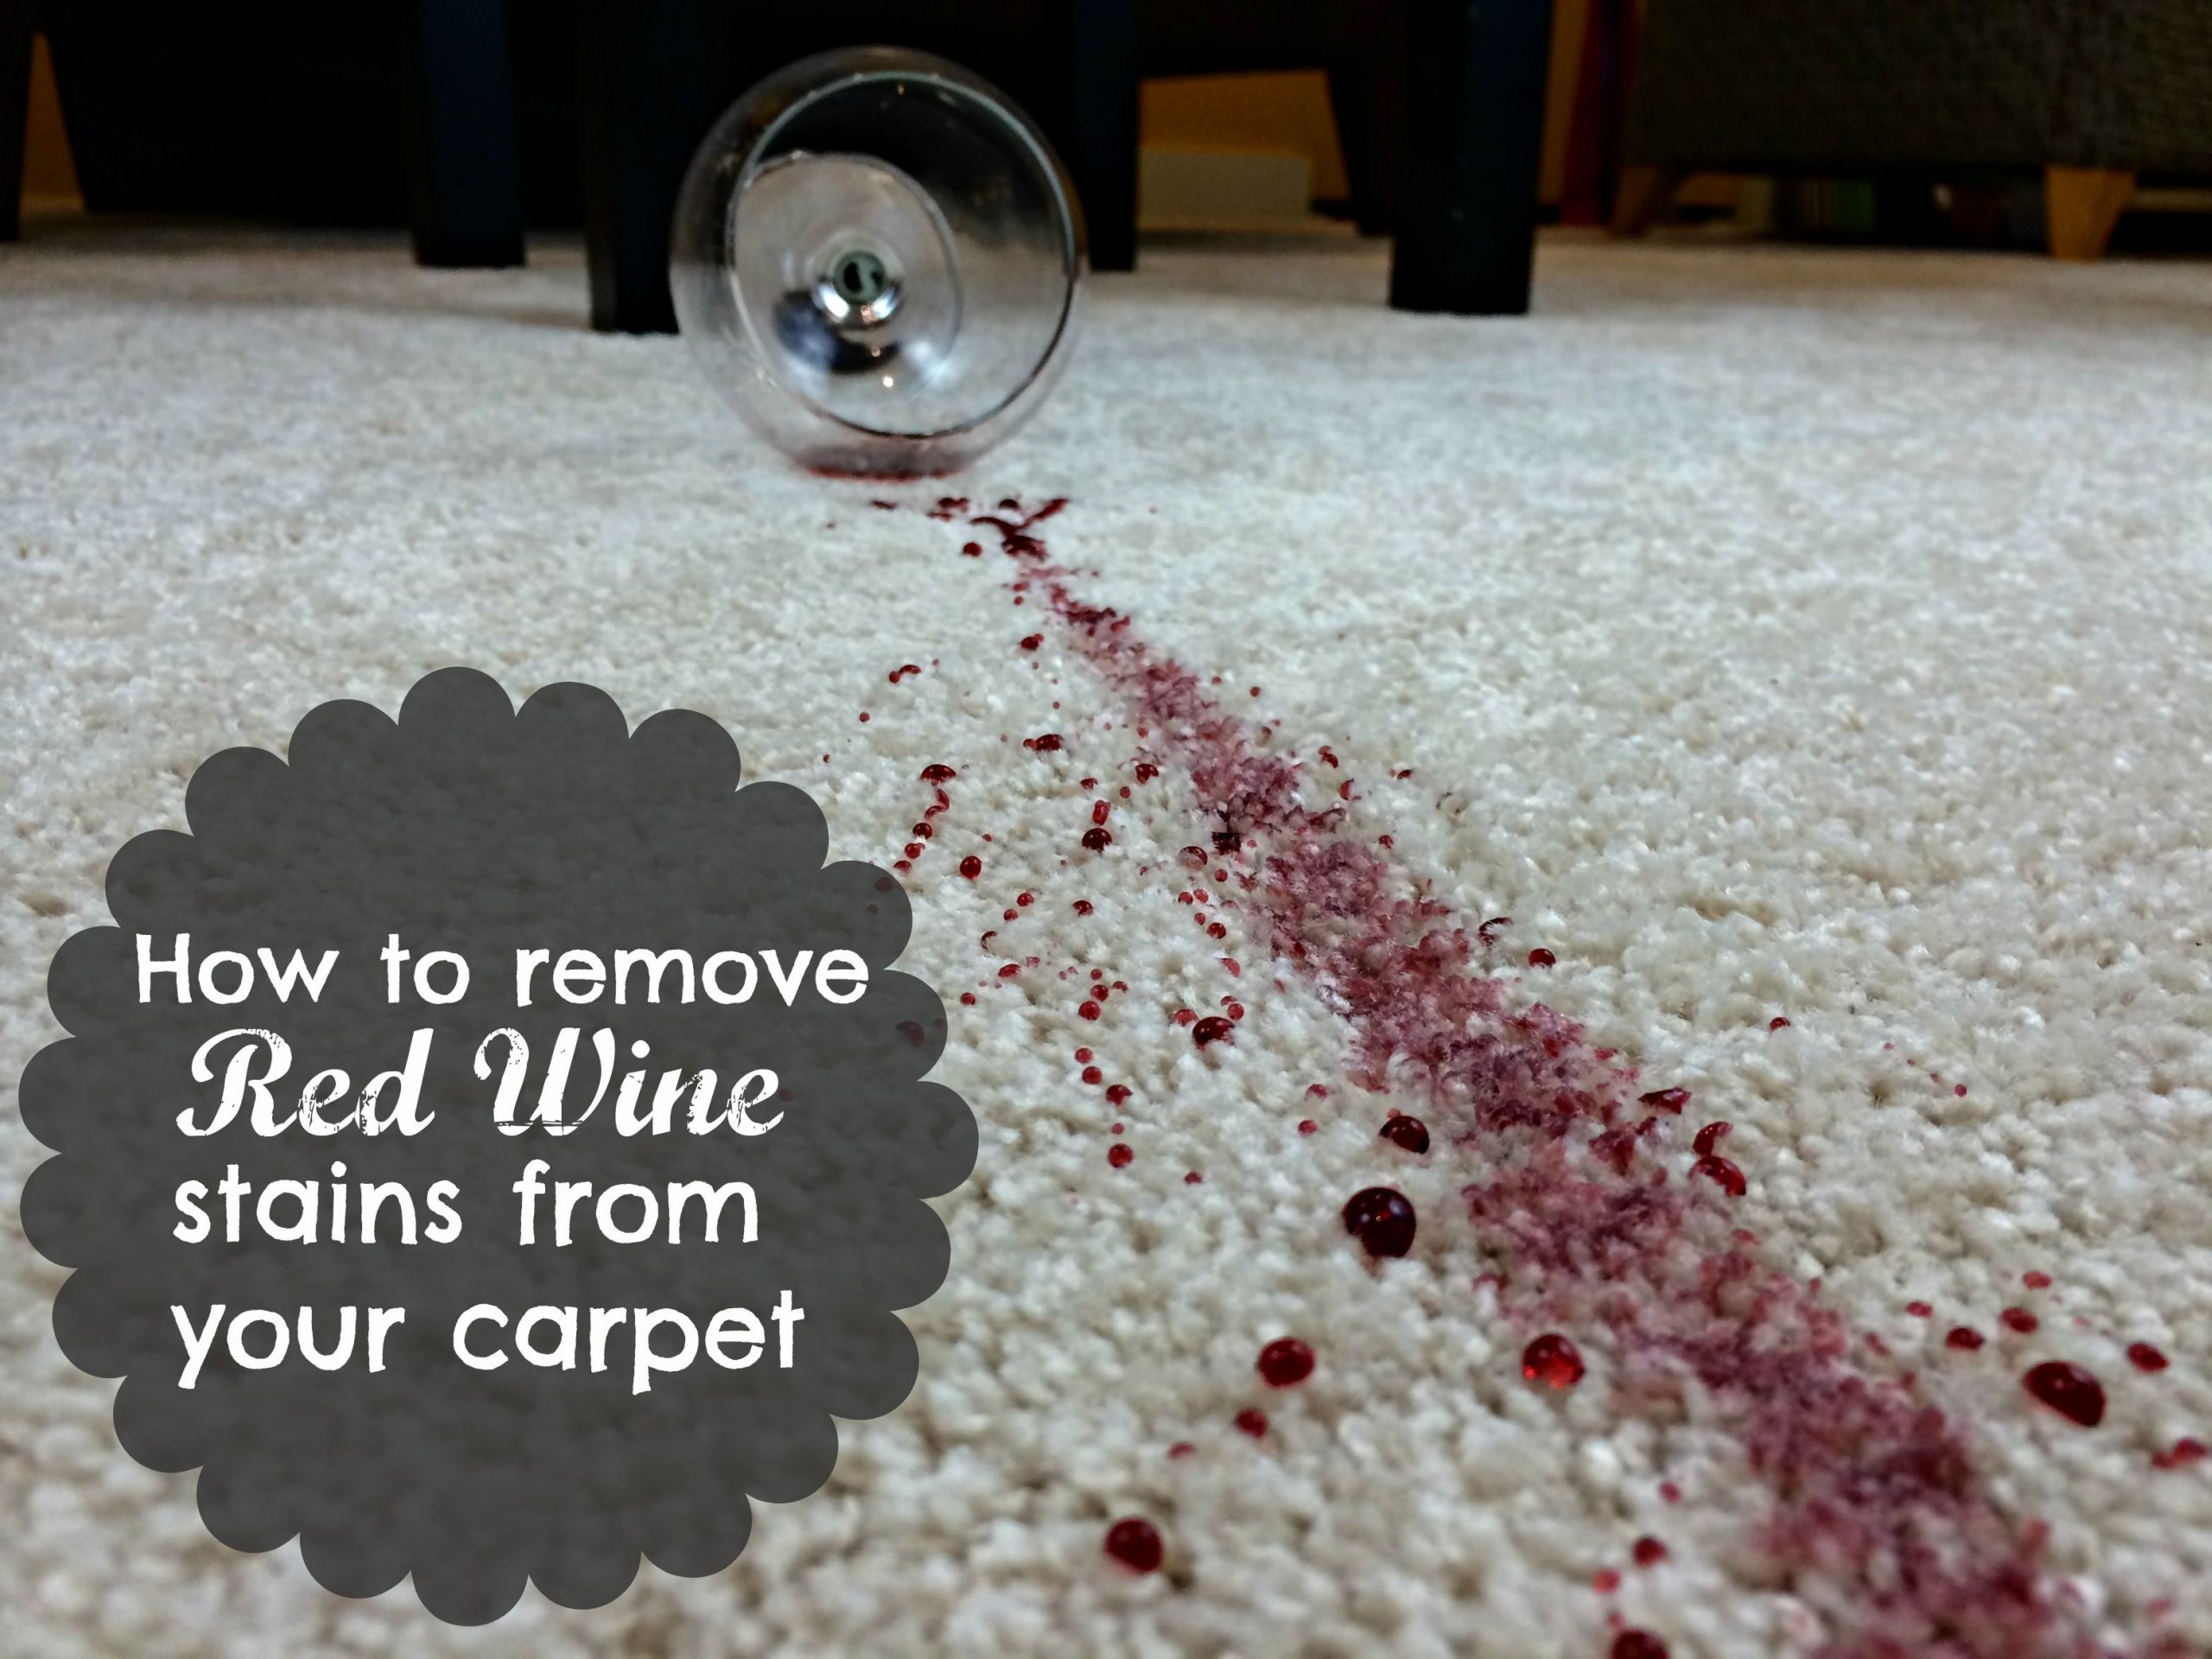 How to Remove Red Wine Stains from Carpet